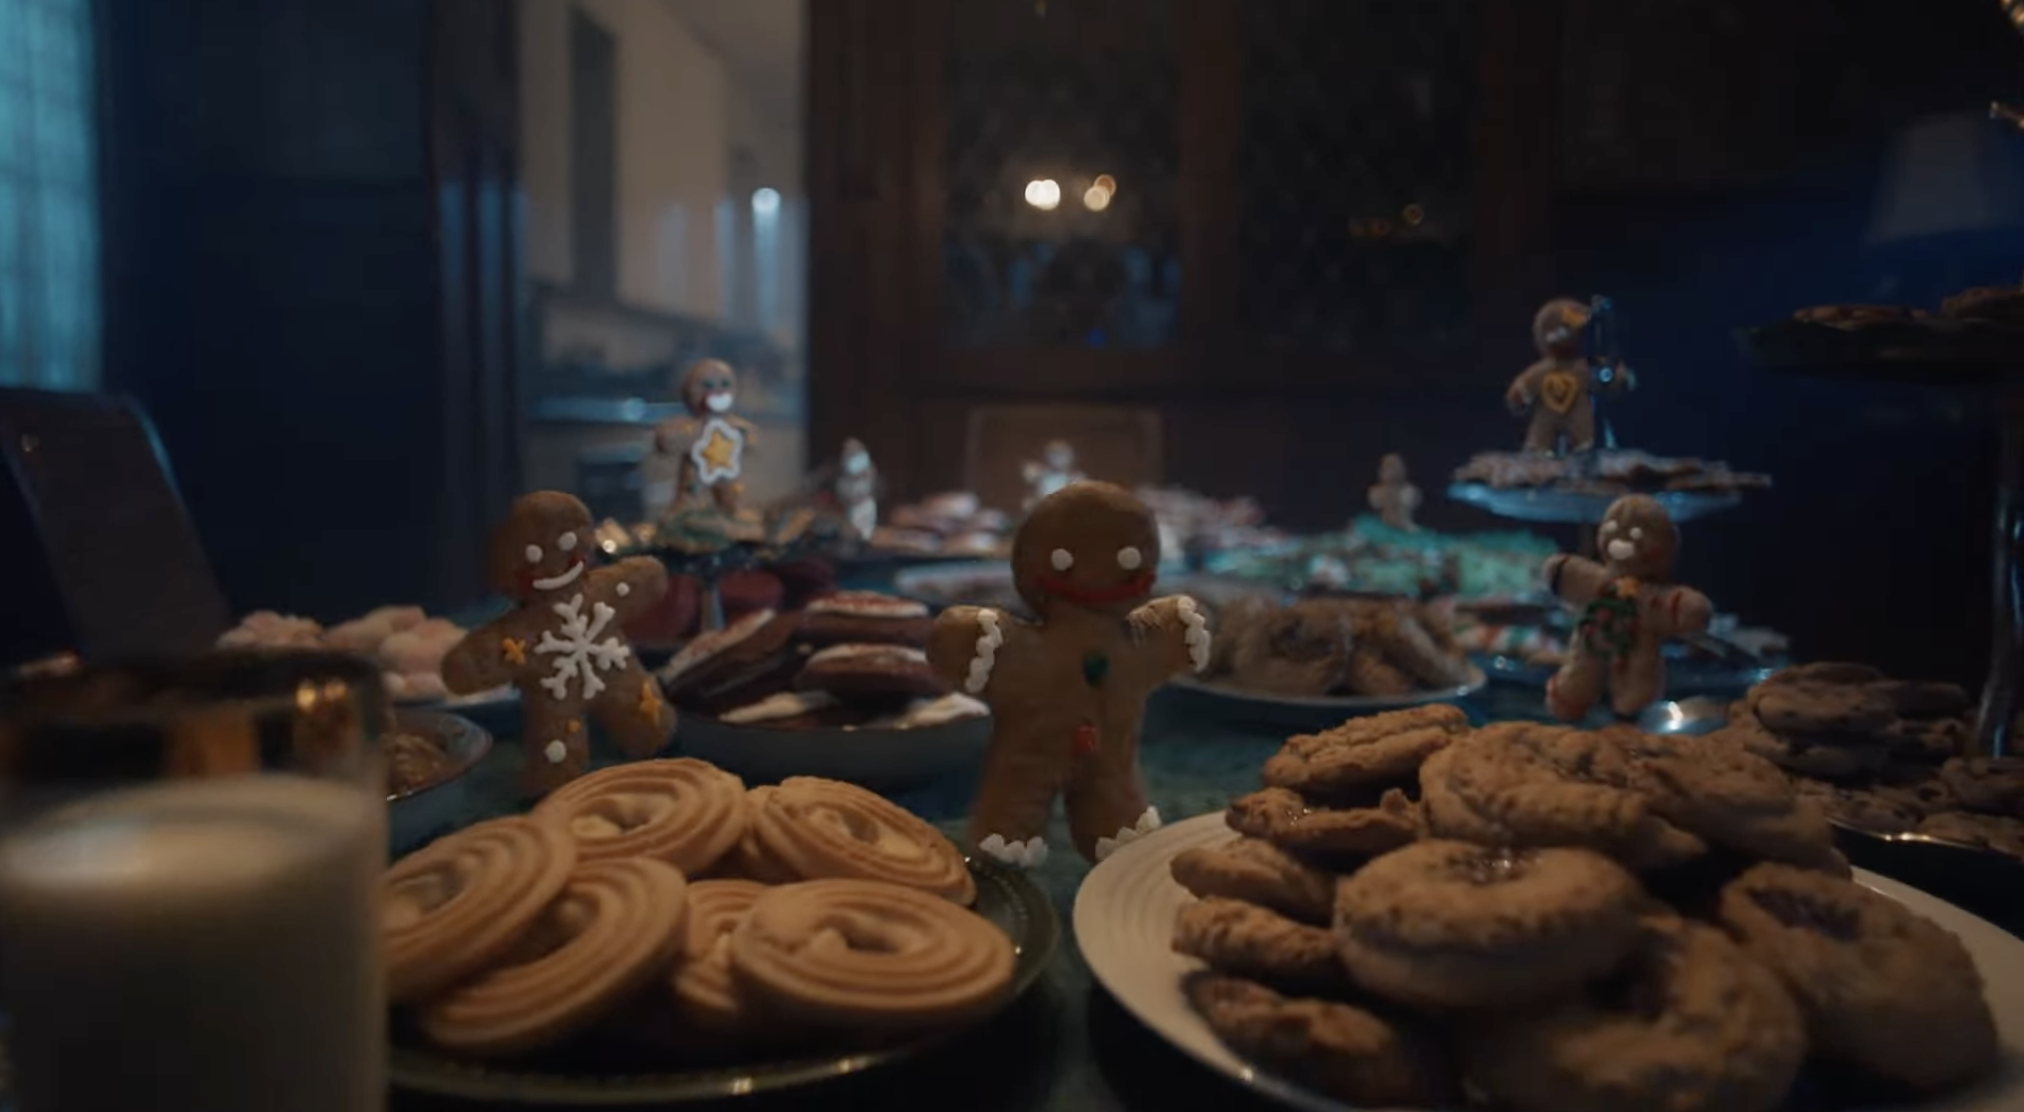 A table of cookies with animated gingerbread men